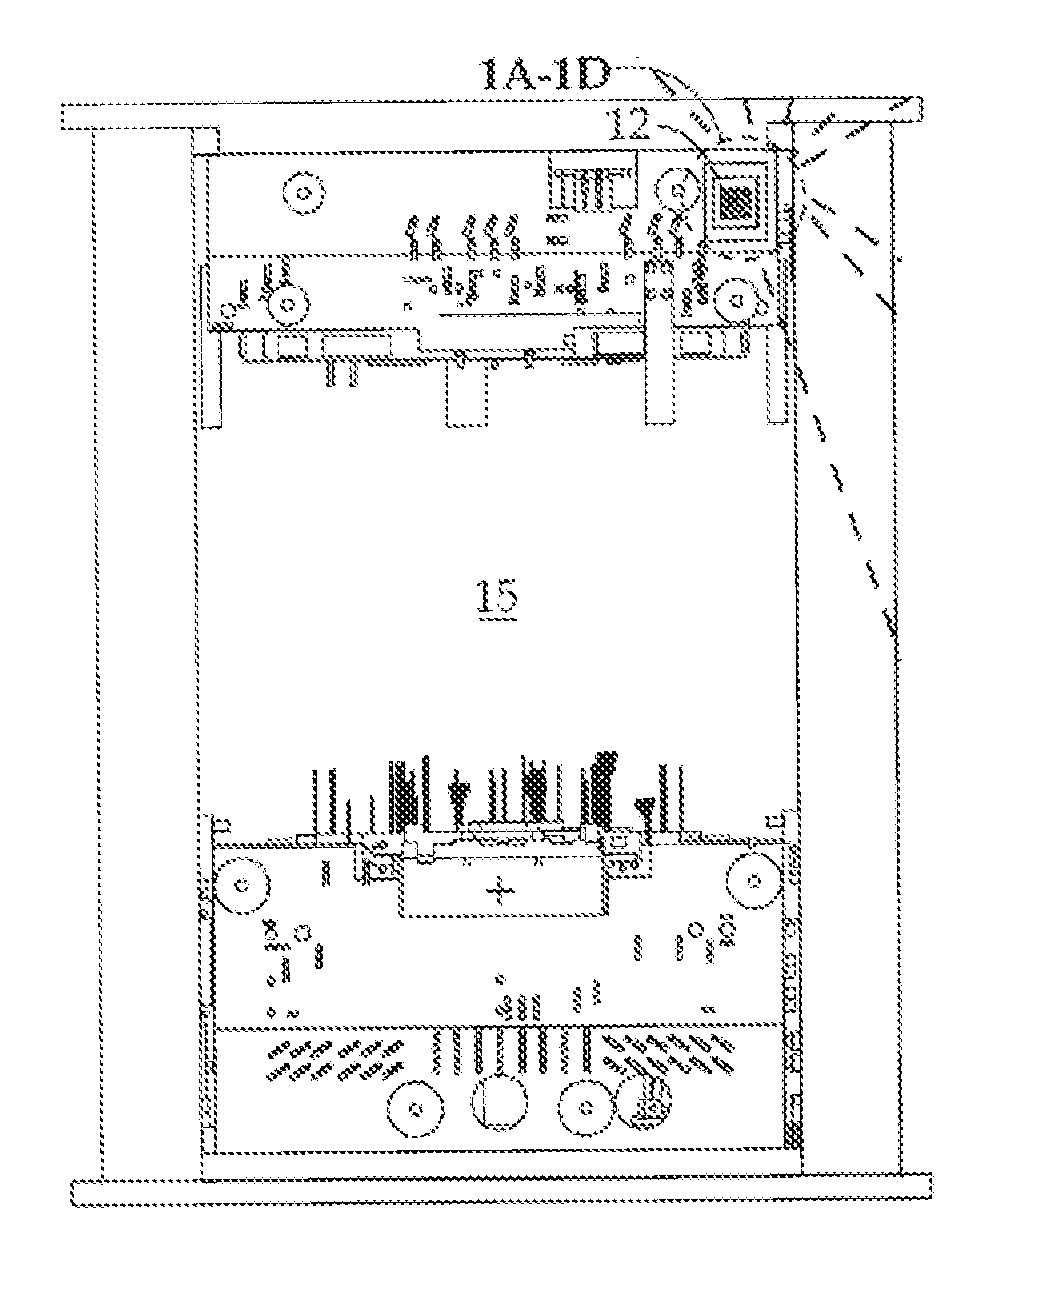 System and method for automated tool management